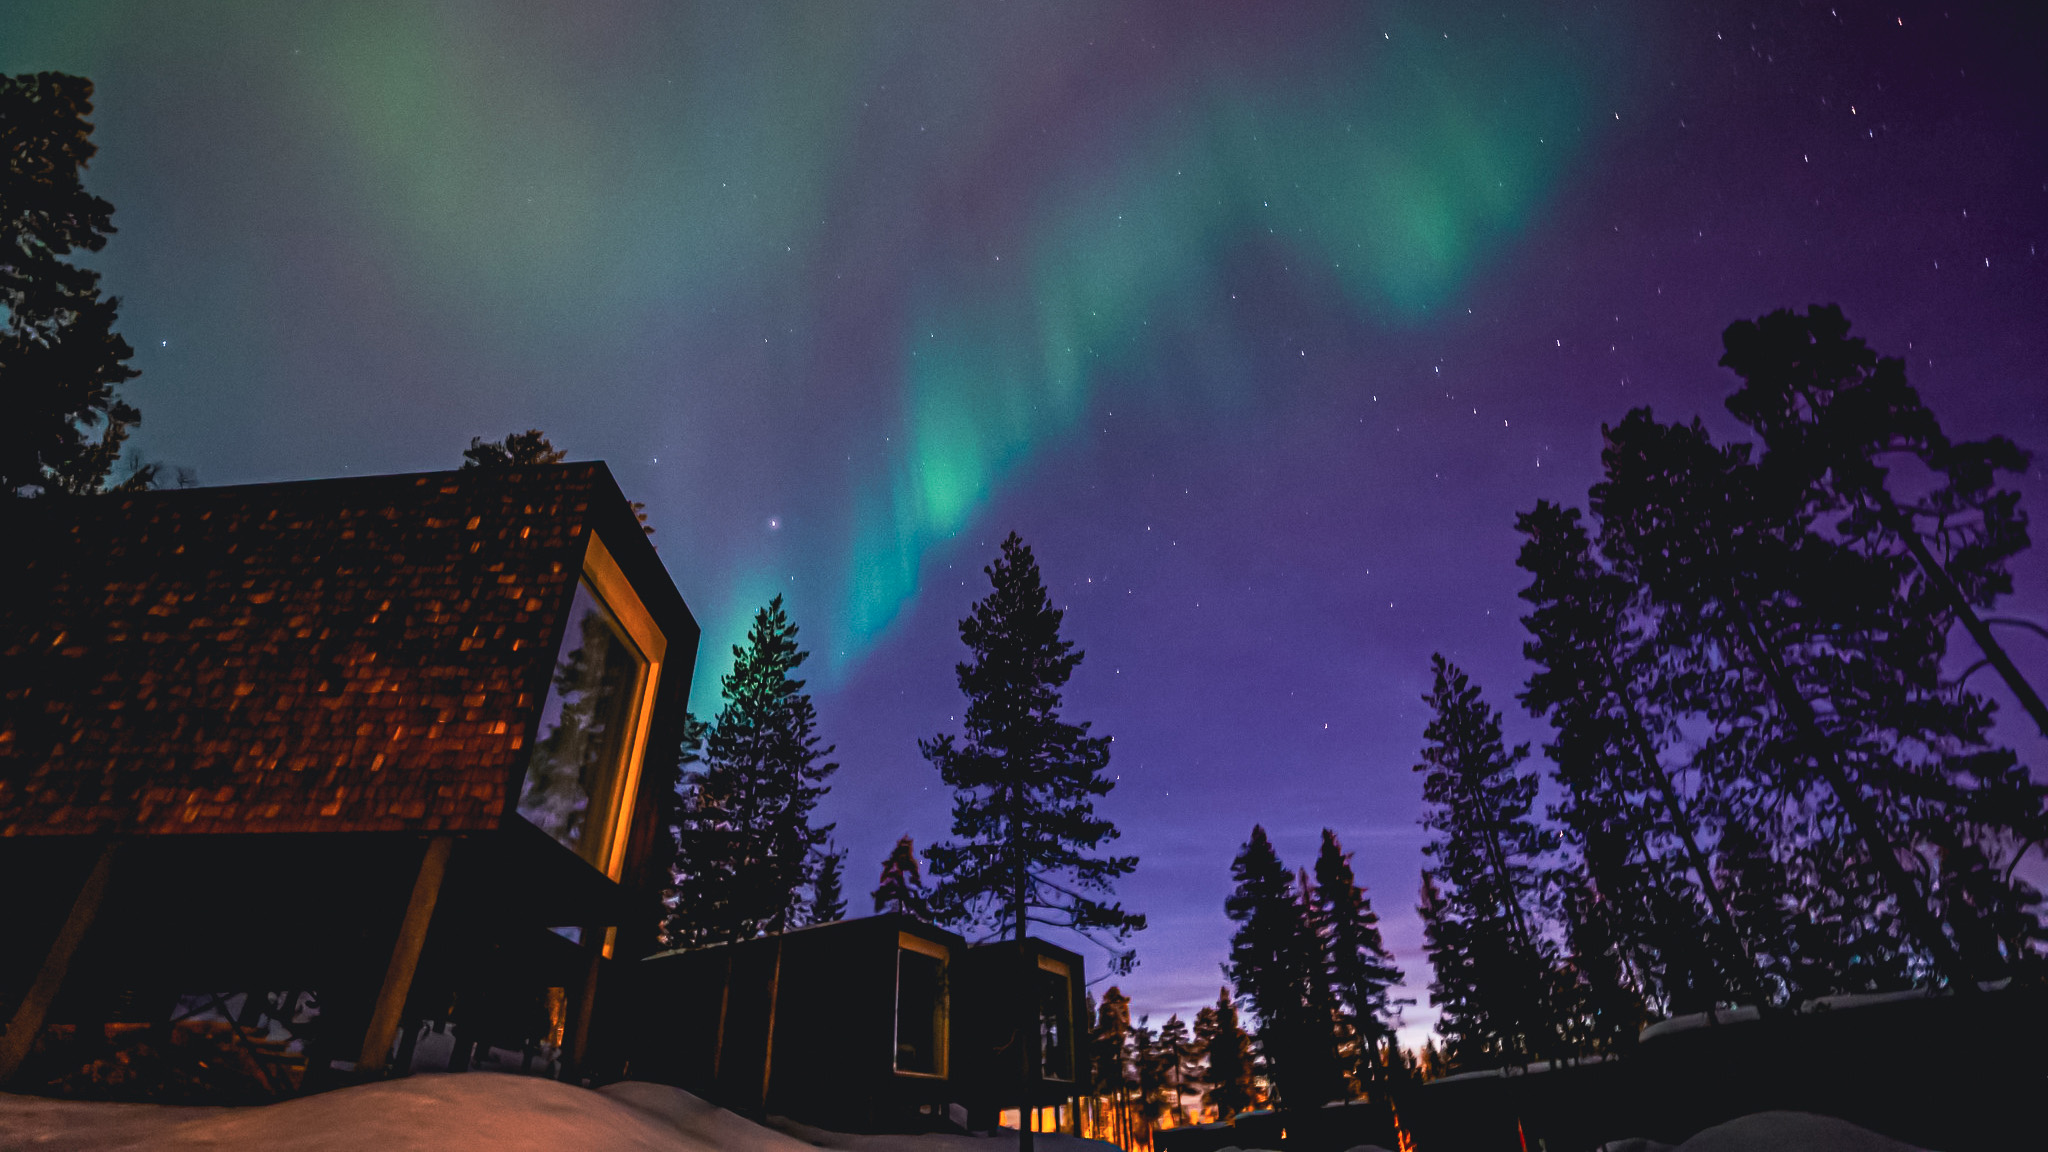 Arctic TreeHouse Hotel under the NOrthern Lights in Rovaniemi Lapland